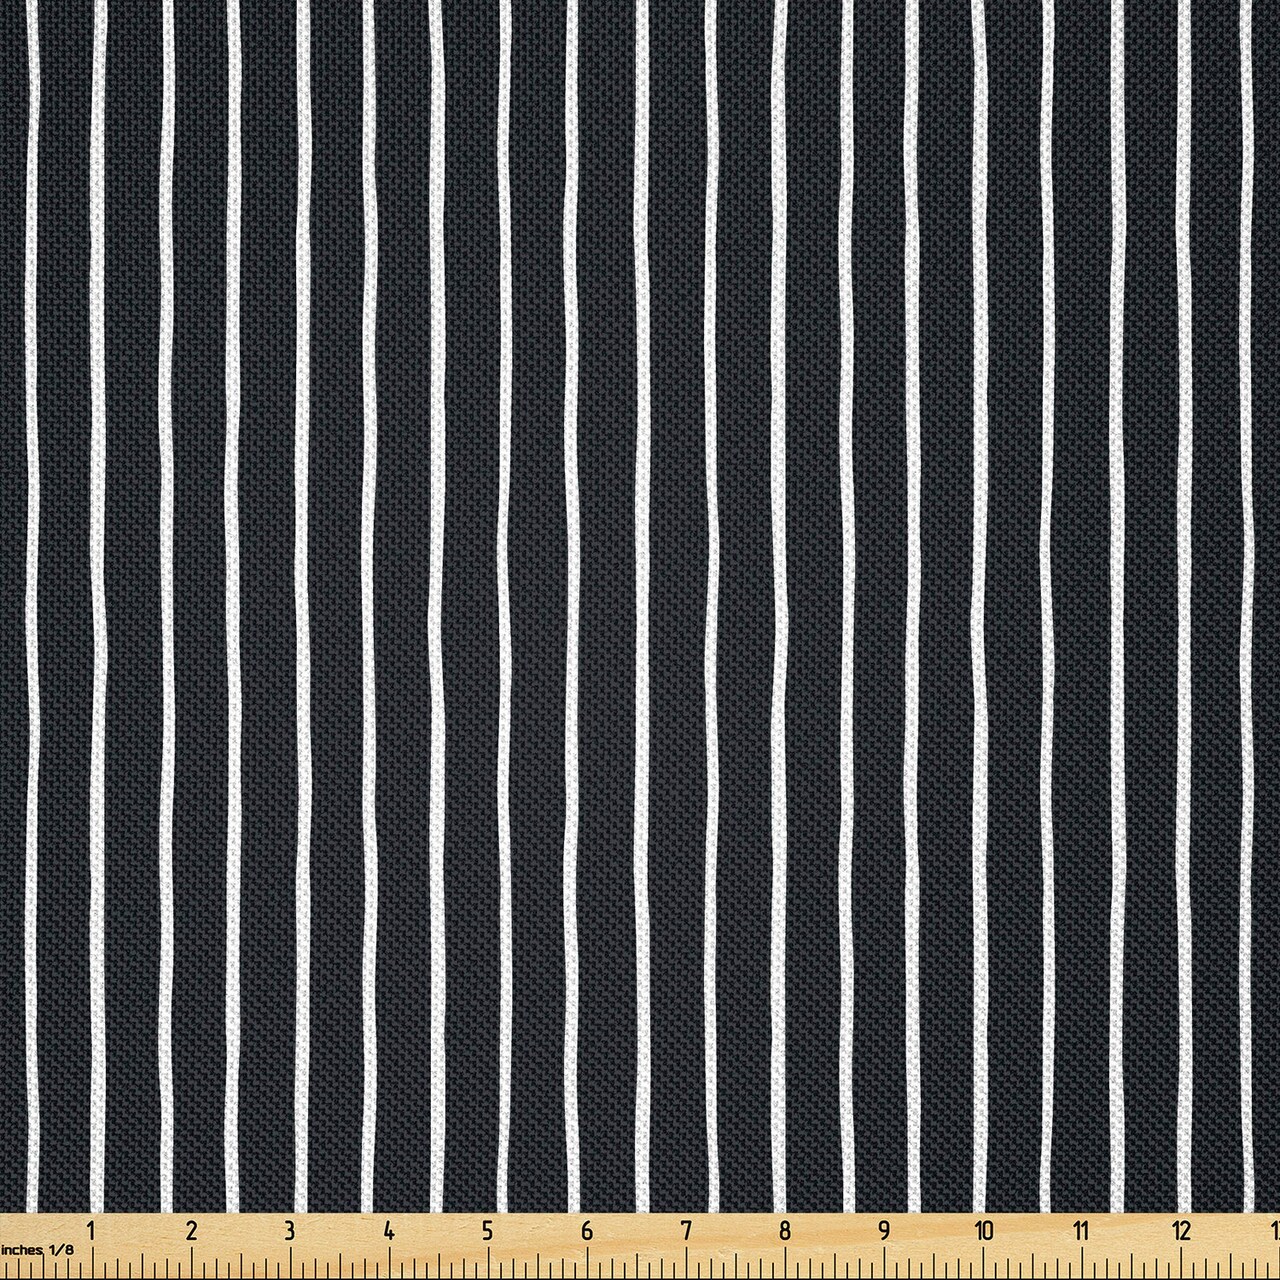 Ambesonne Pinstripe Fabric by The Yard, Monochrome Black and White Design White Thin Uneven Lines on Dark Backdrop, Decorative Satin Fabric for Home Textiles and Crafts, 2 Yards, Black White